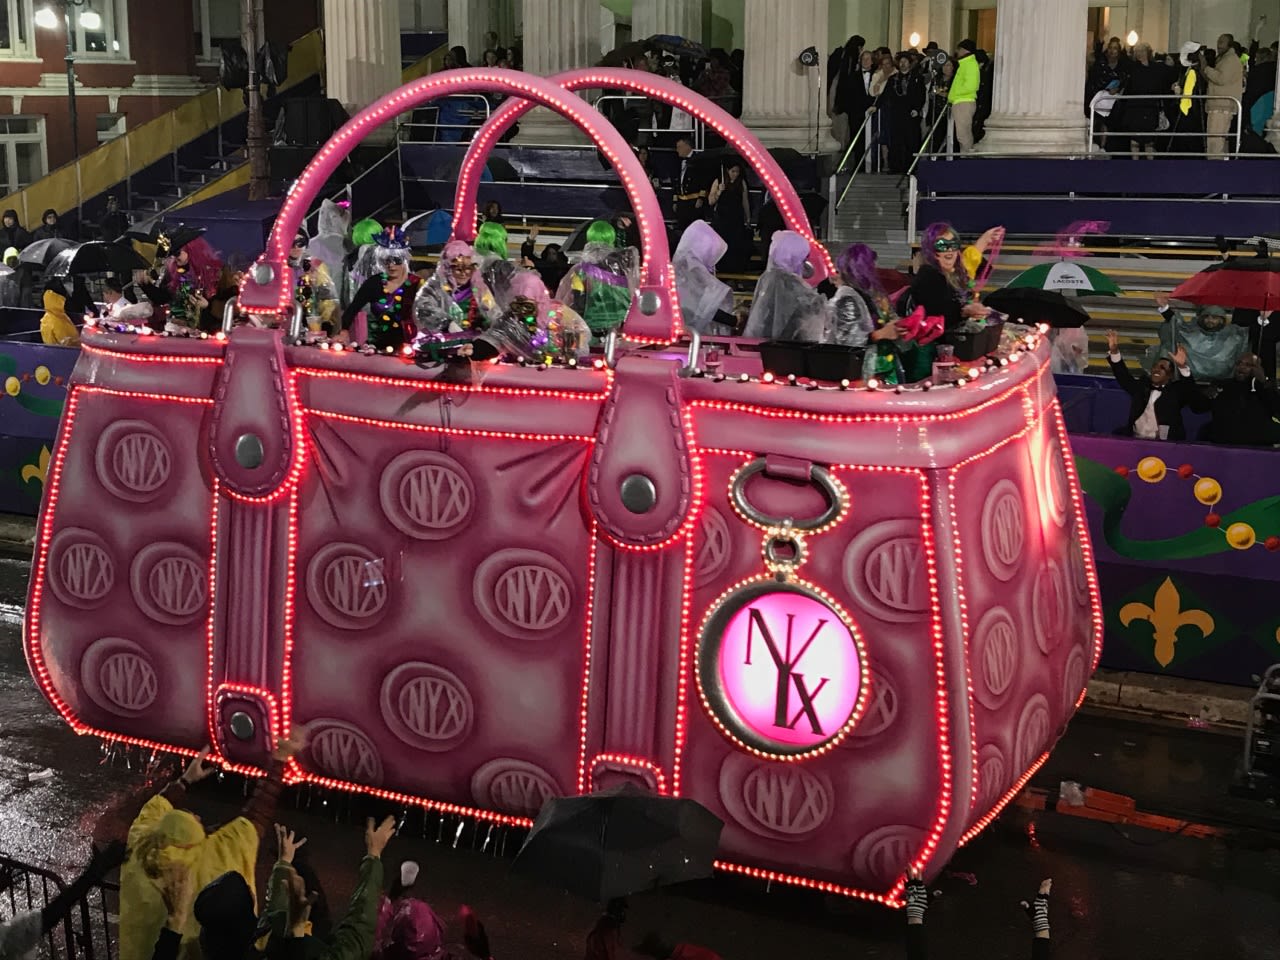 New Orleans City Council vote to revoke Krewe of Nyx’s Mardi Gras parade permit